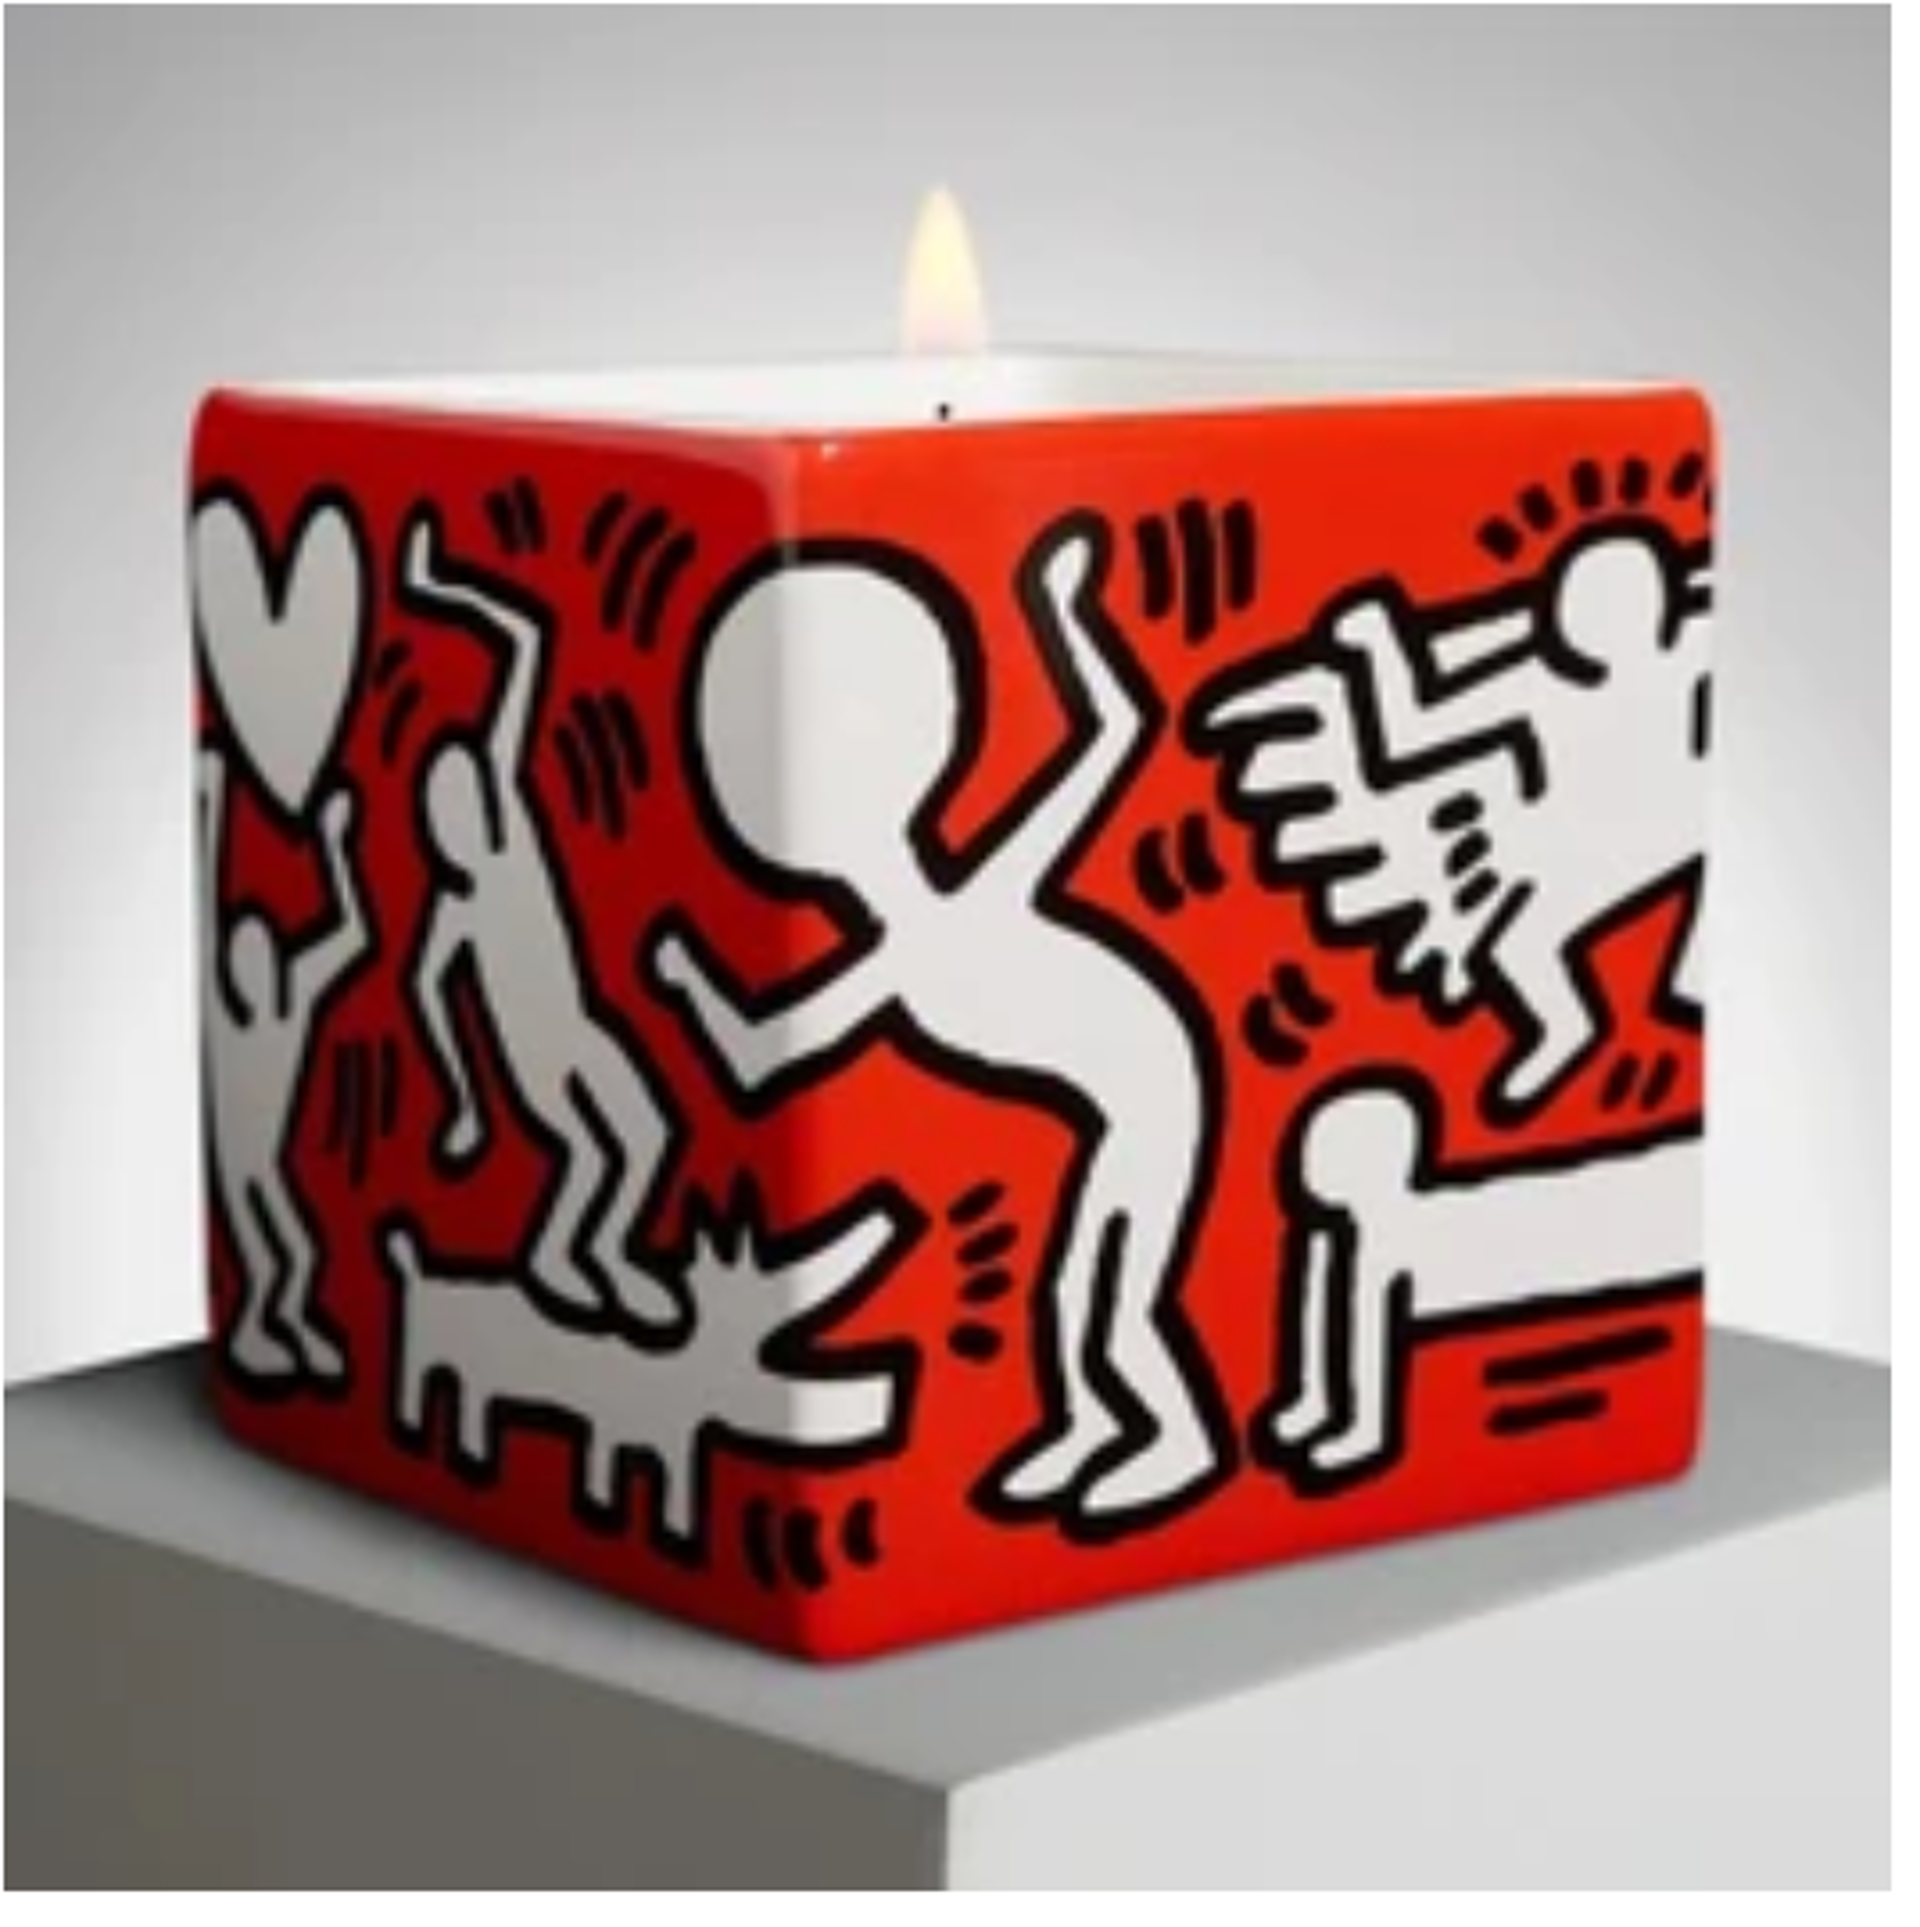 White on Red Candle by Keith Haring